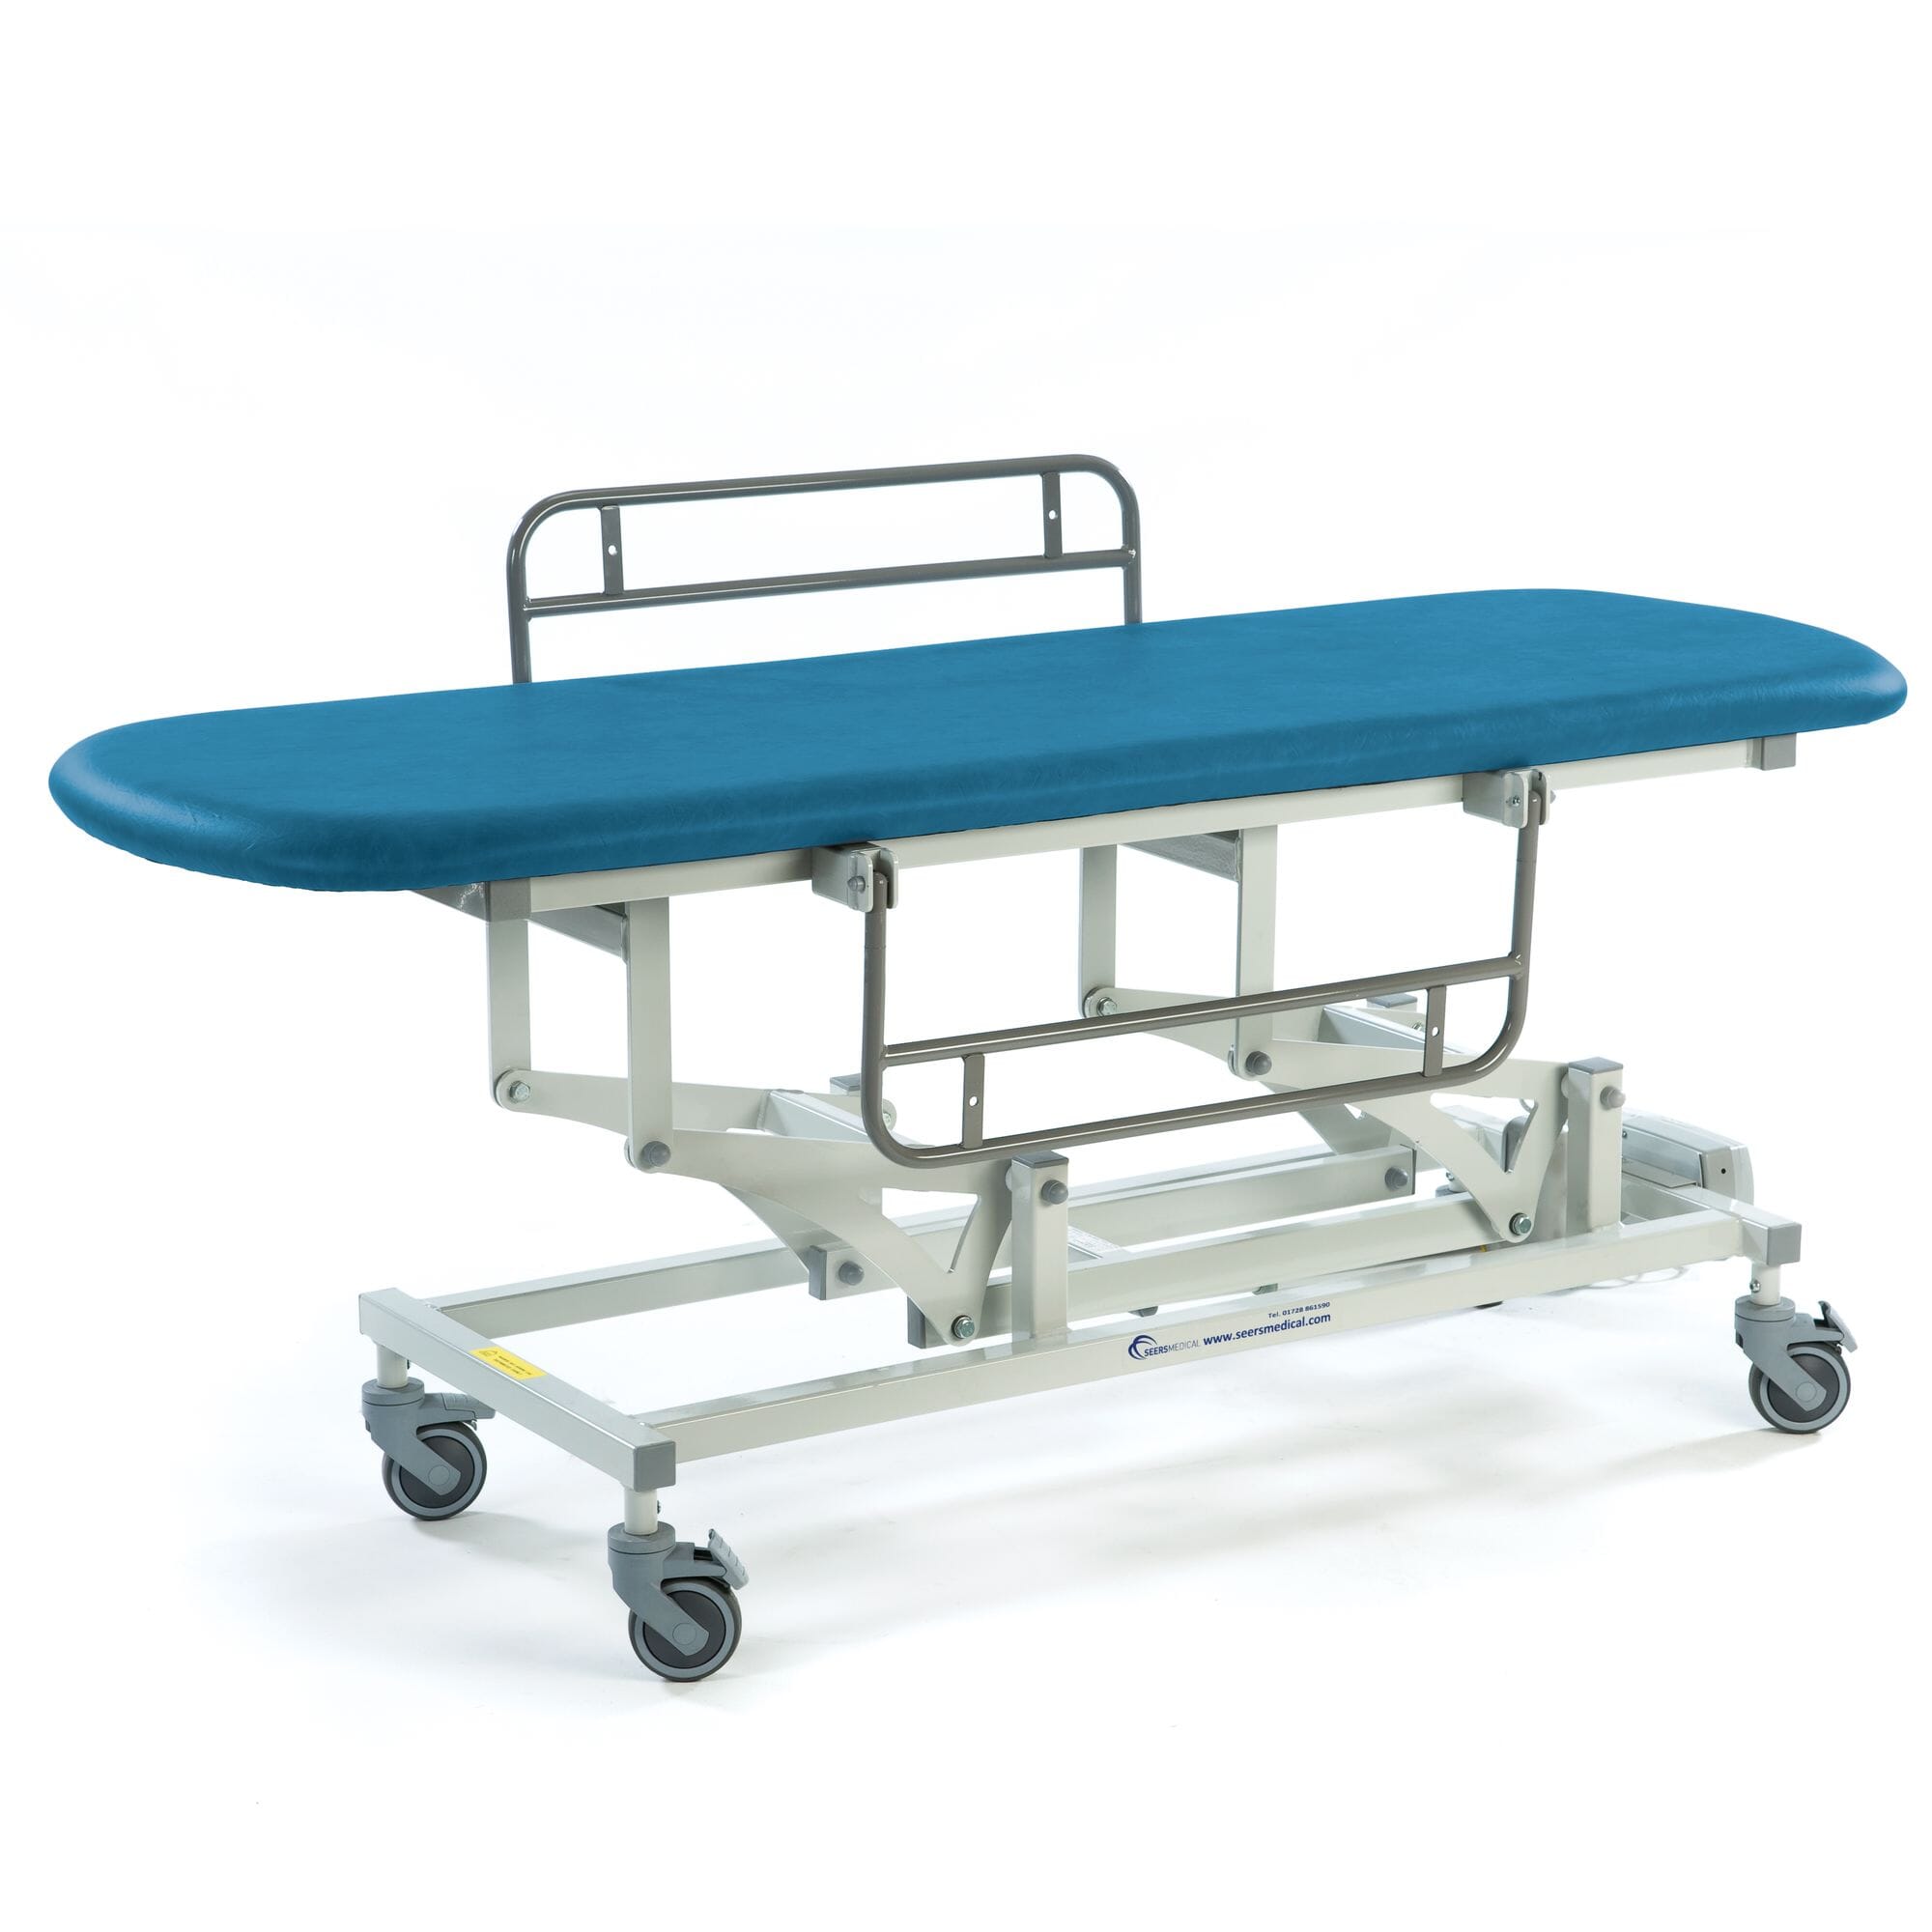 View Electric Sterling Changing Table Canard 1840mm information